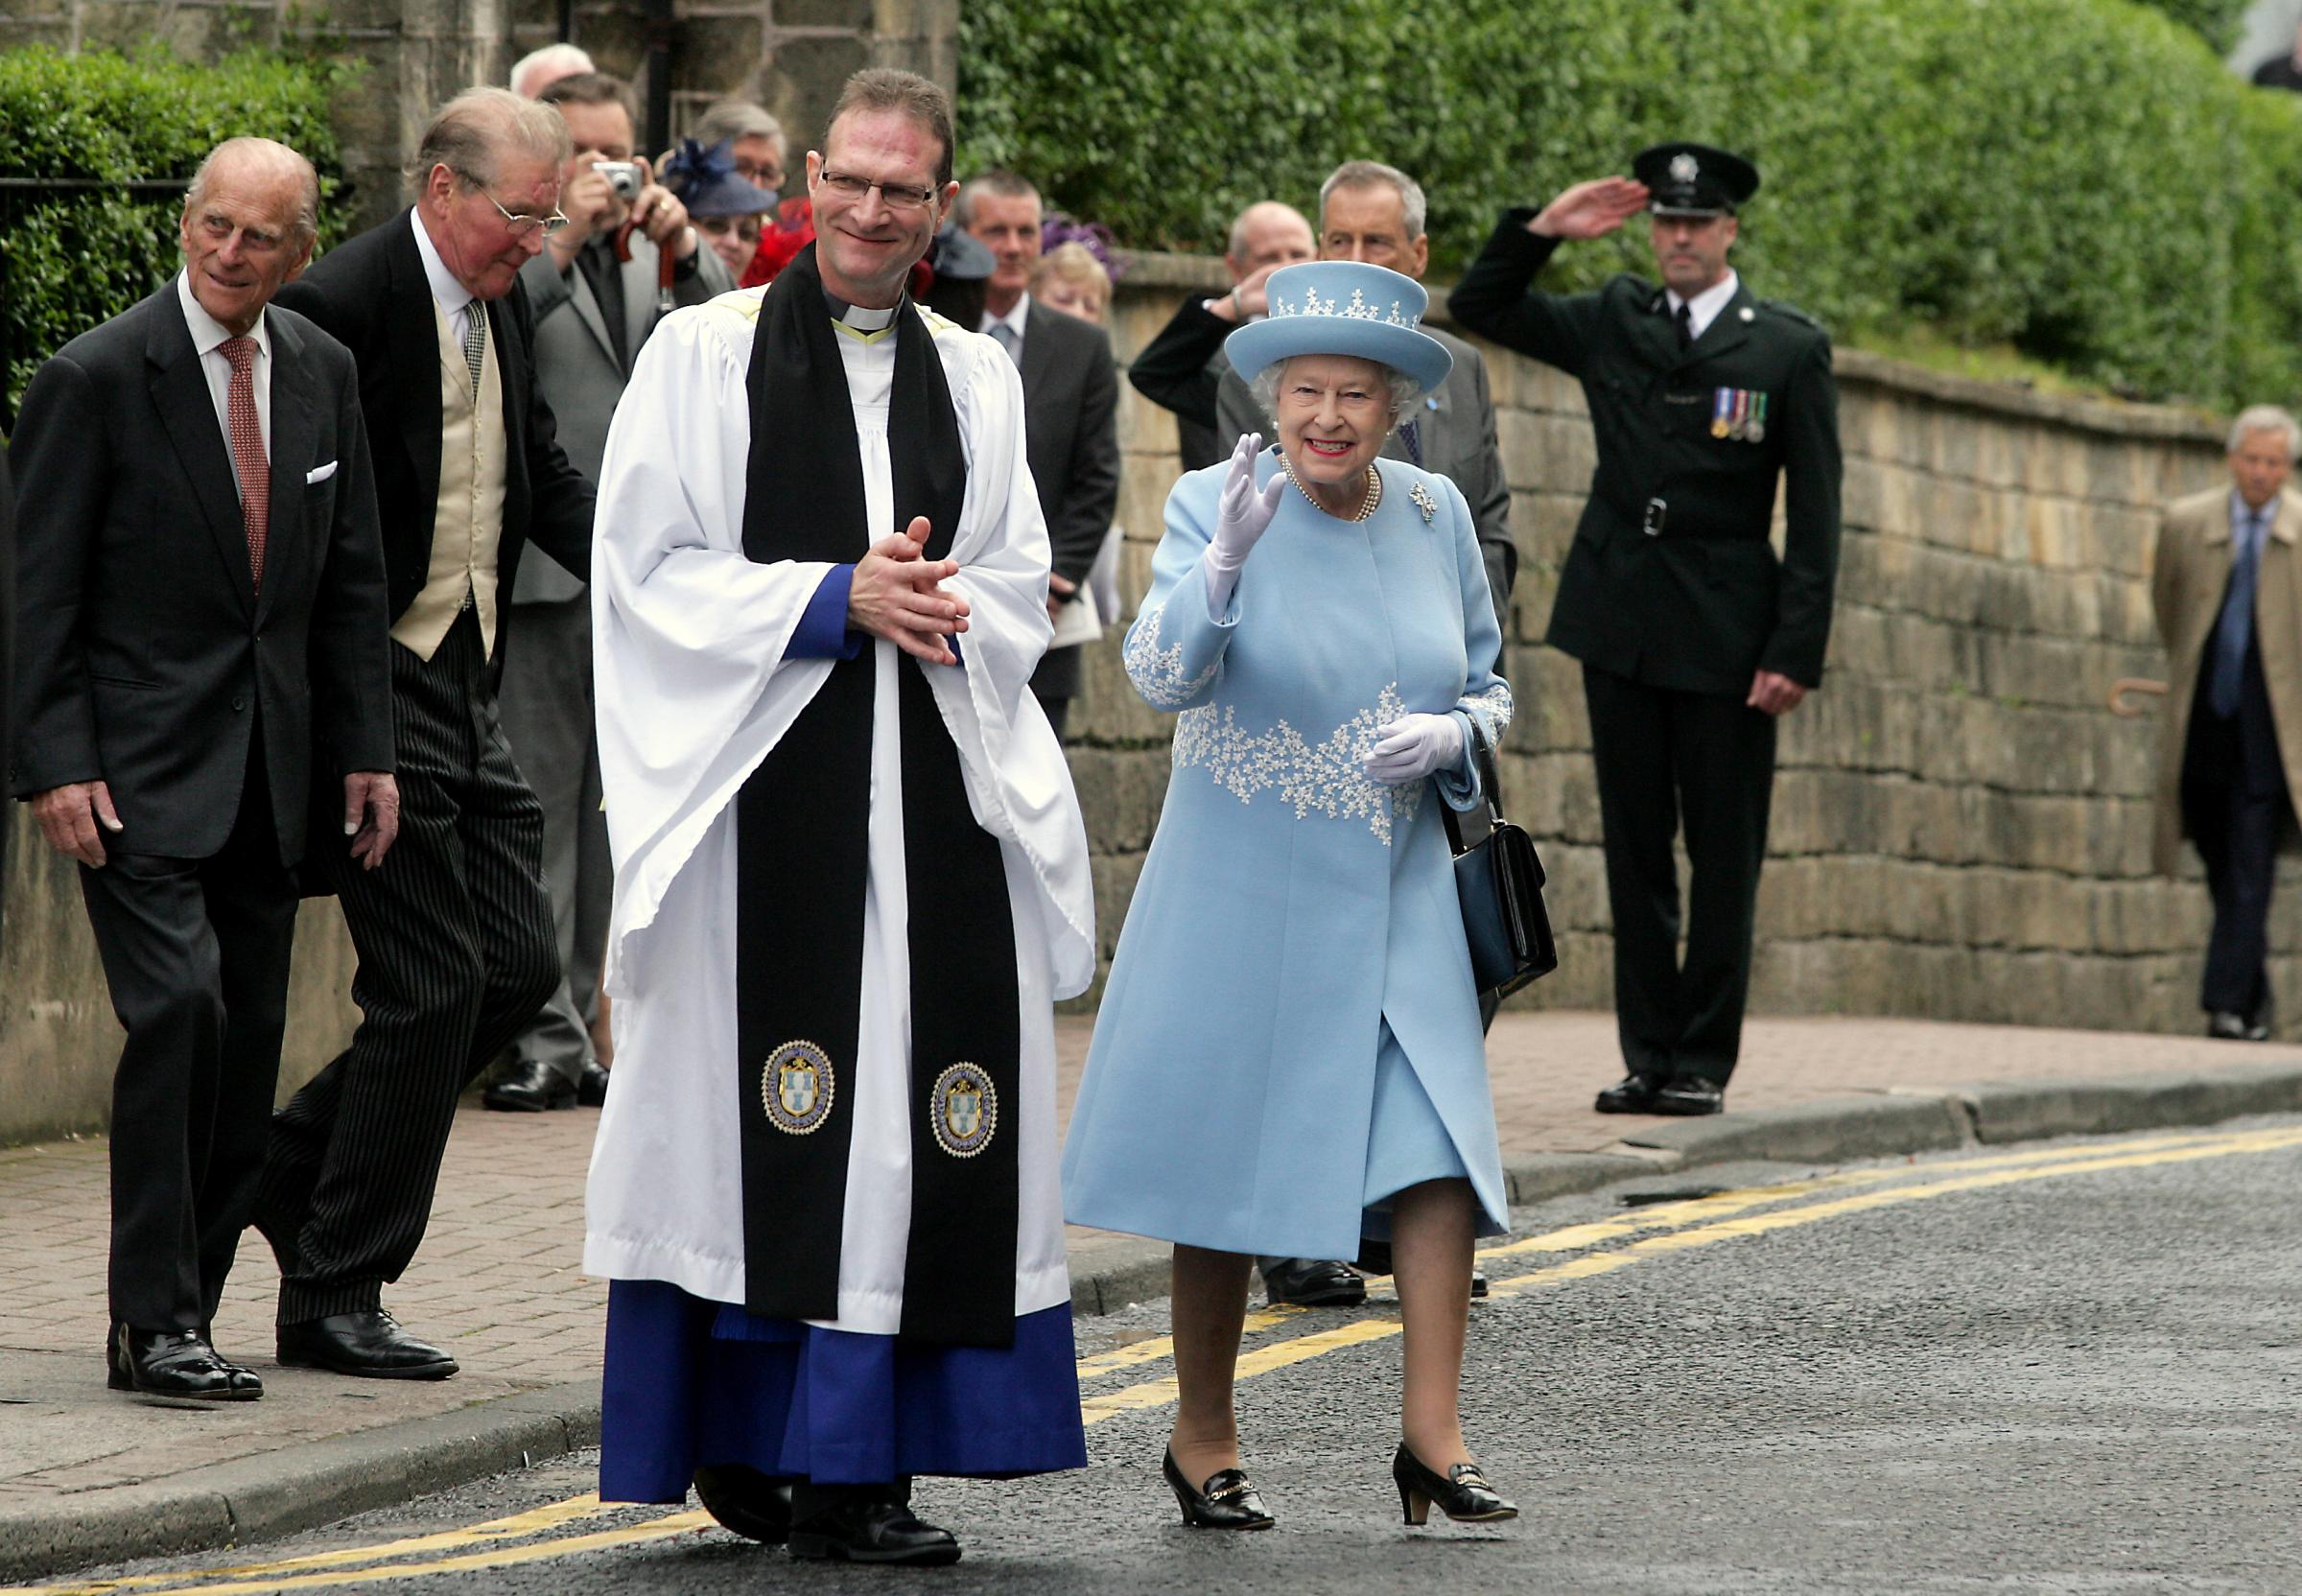 Queen Elizabeth II pictured with Dean Kenneth Hall